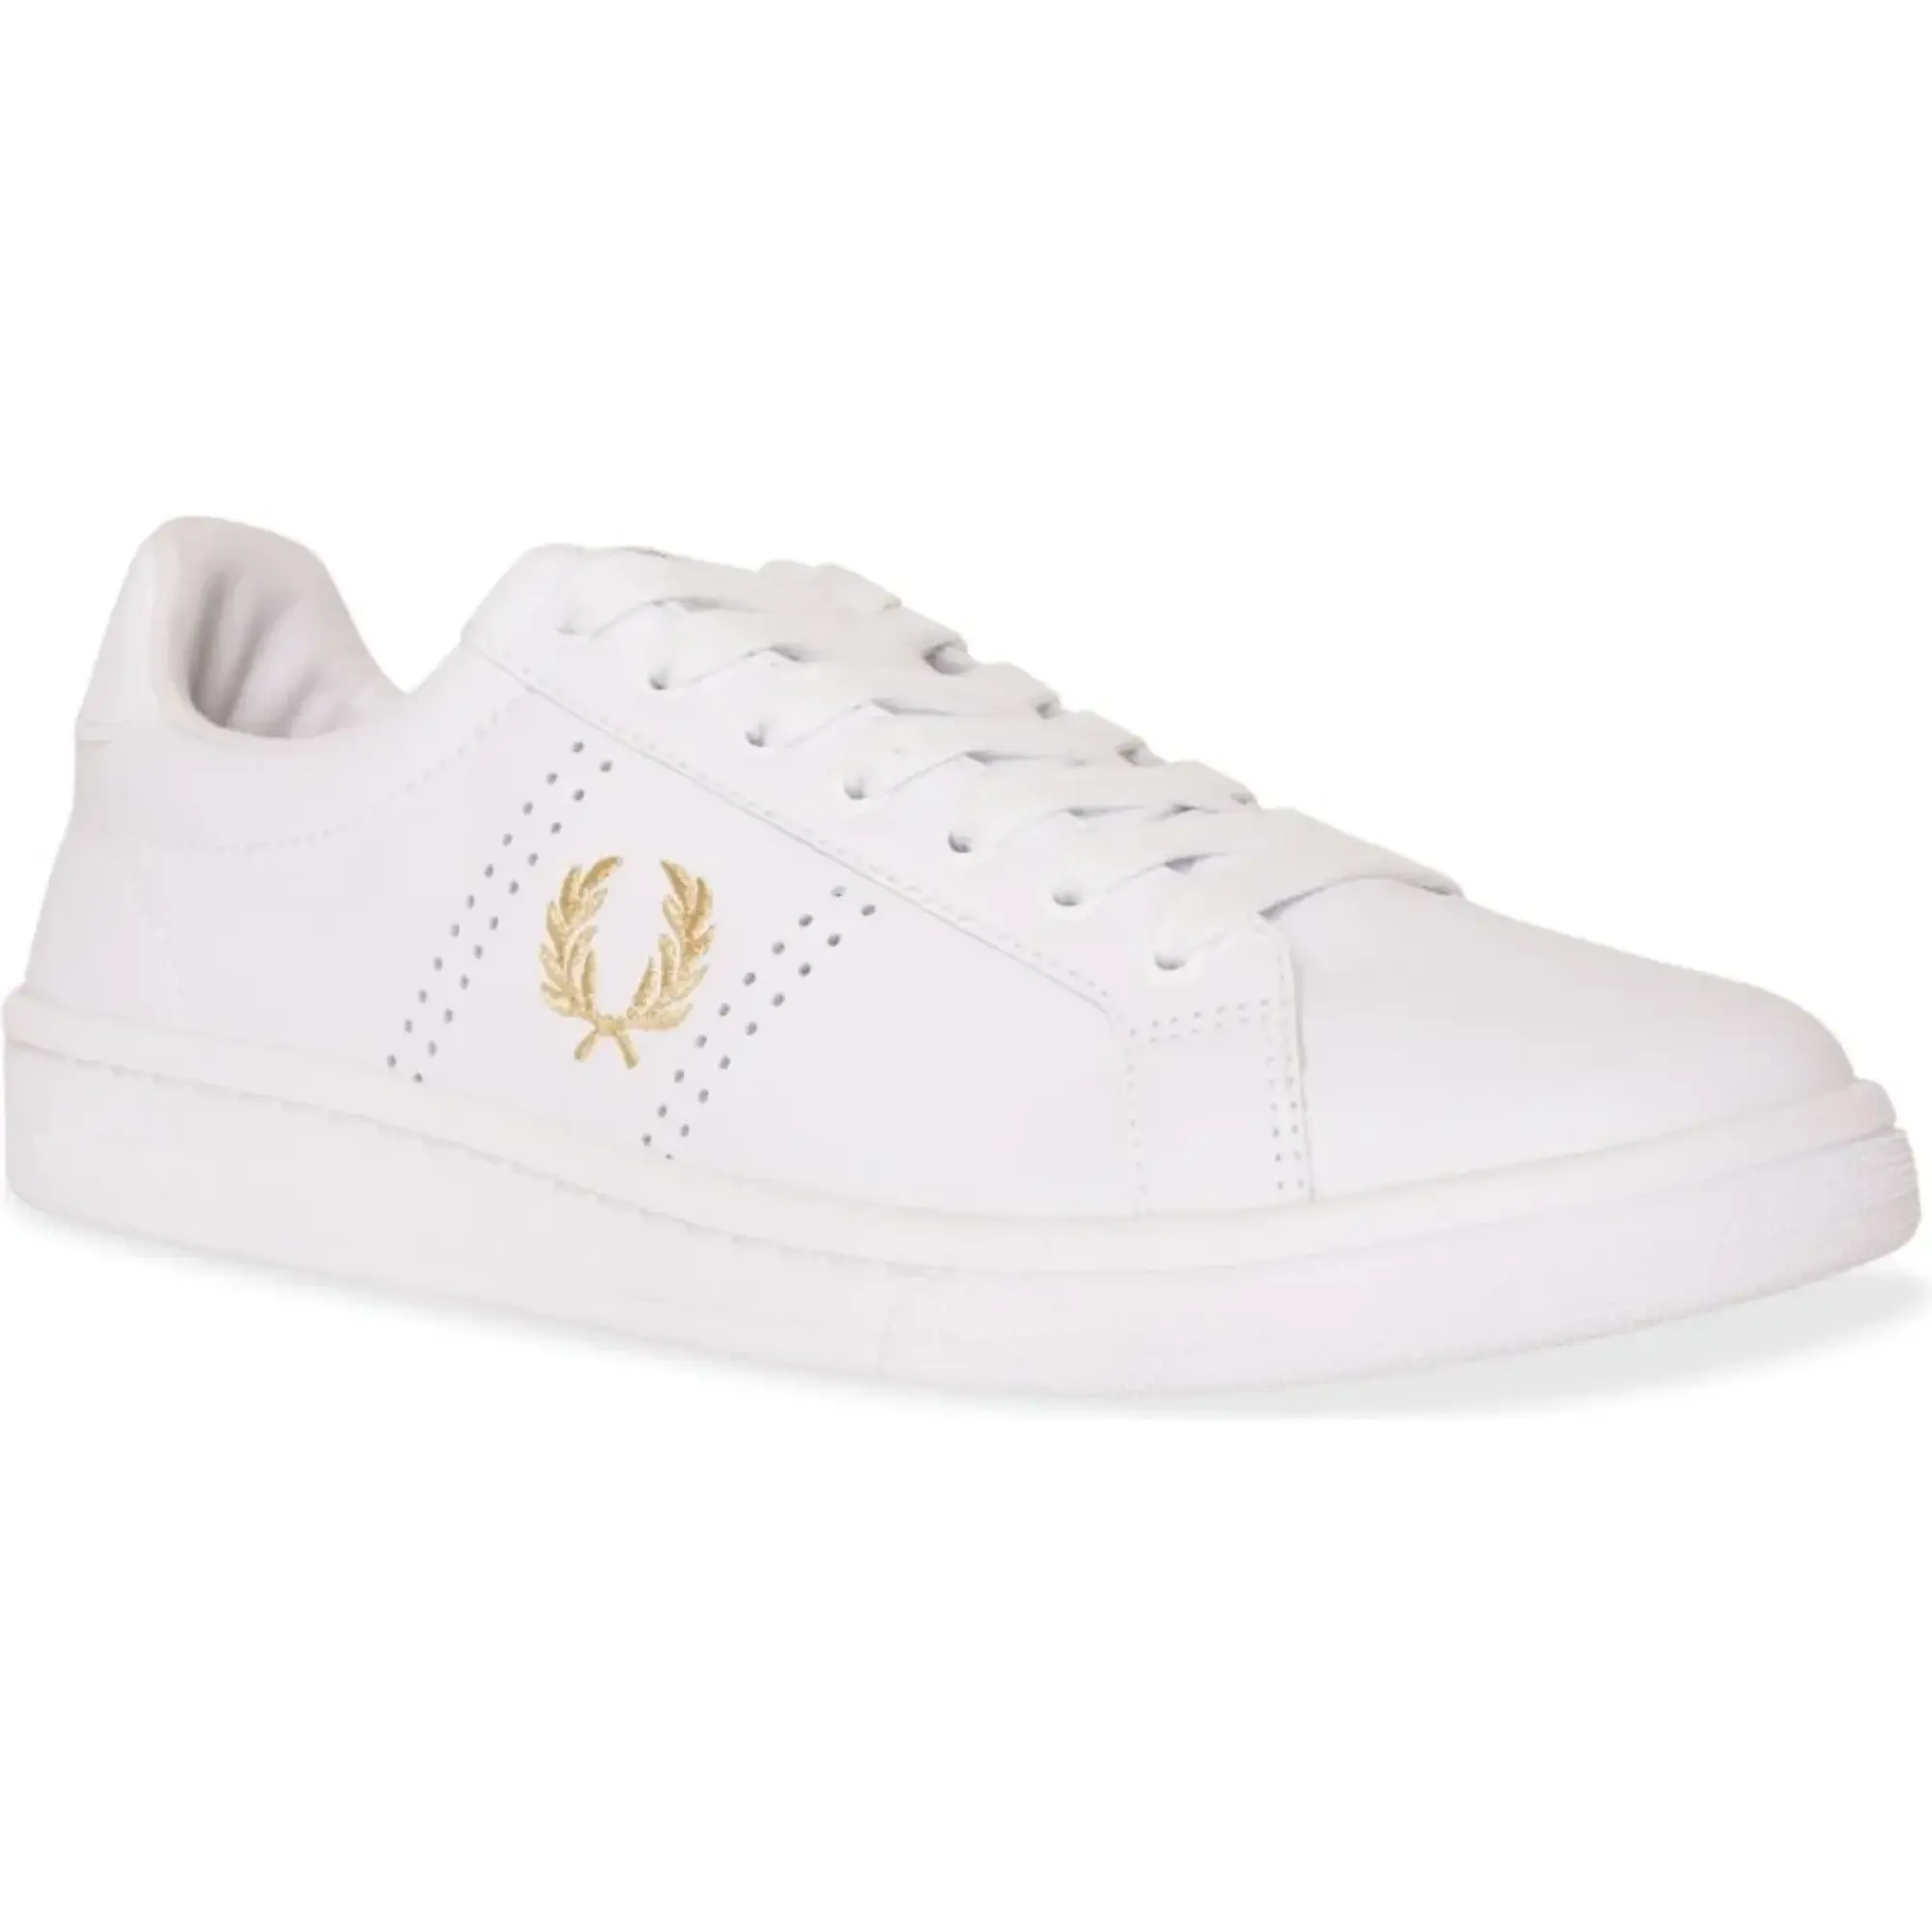 Fred Perry B721 - White - Mens